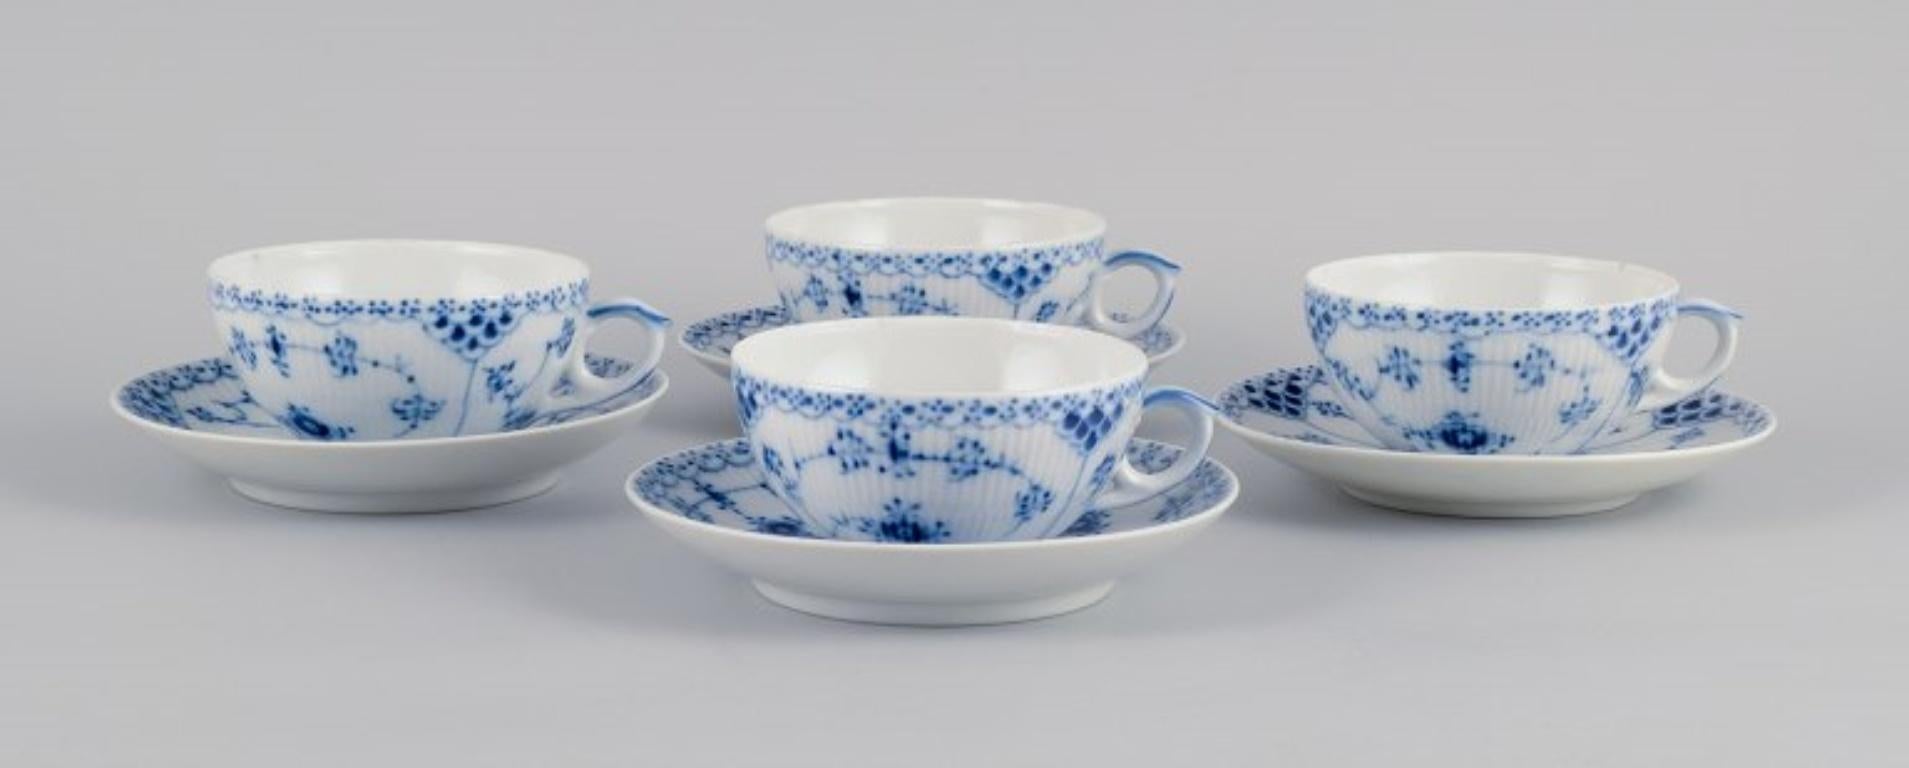 Royal Copenhagen, Blue Fluted half lace, four pairs of teacups.
Model 081.
Second and third factory quality.
Marked.
In perfect condition.
Cup: D 9.8 x H 5.0 cm.
Saucer: 14.5 cm.